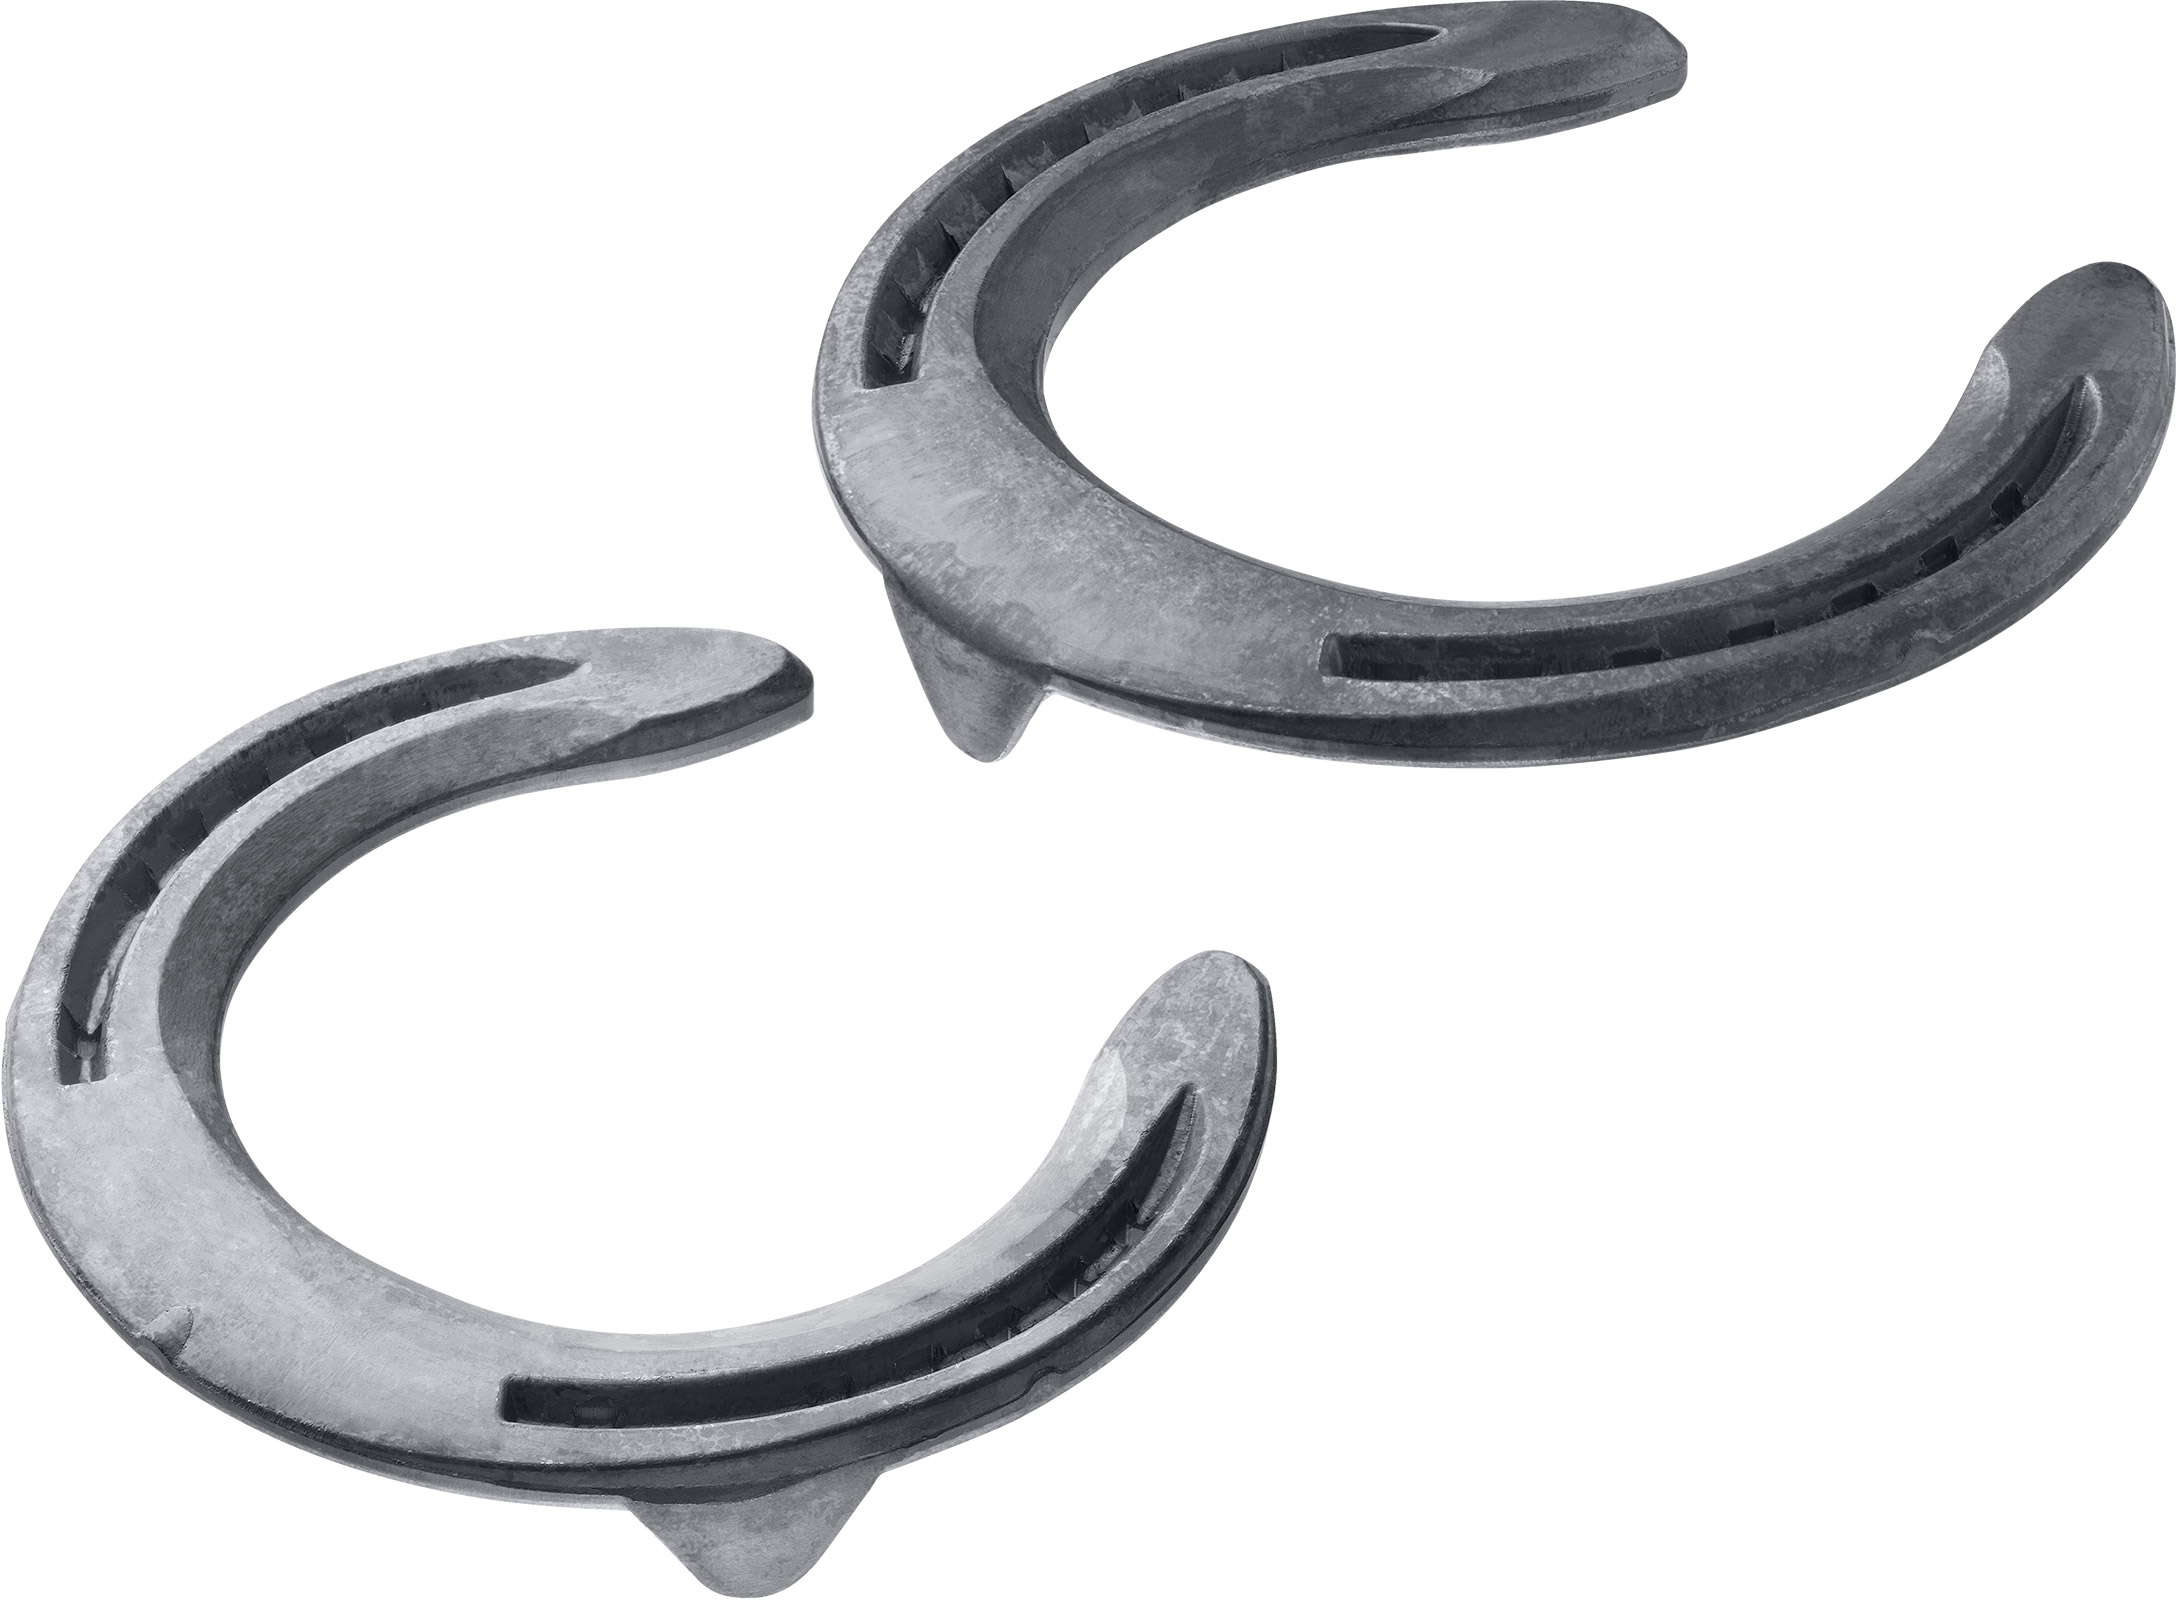 St. Croix Concorde Equi-Librium horseshoes, front toe clip and side clips, bottom side view